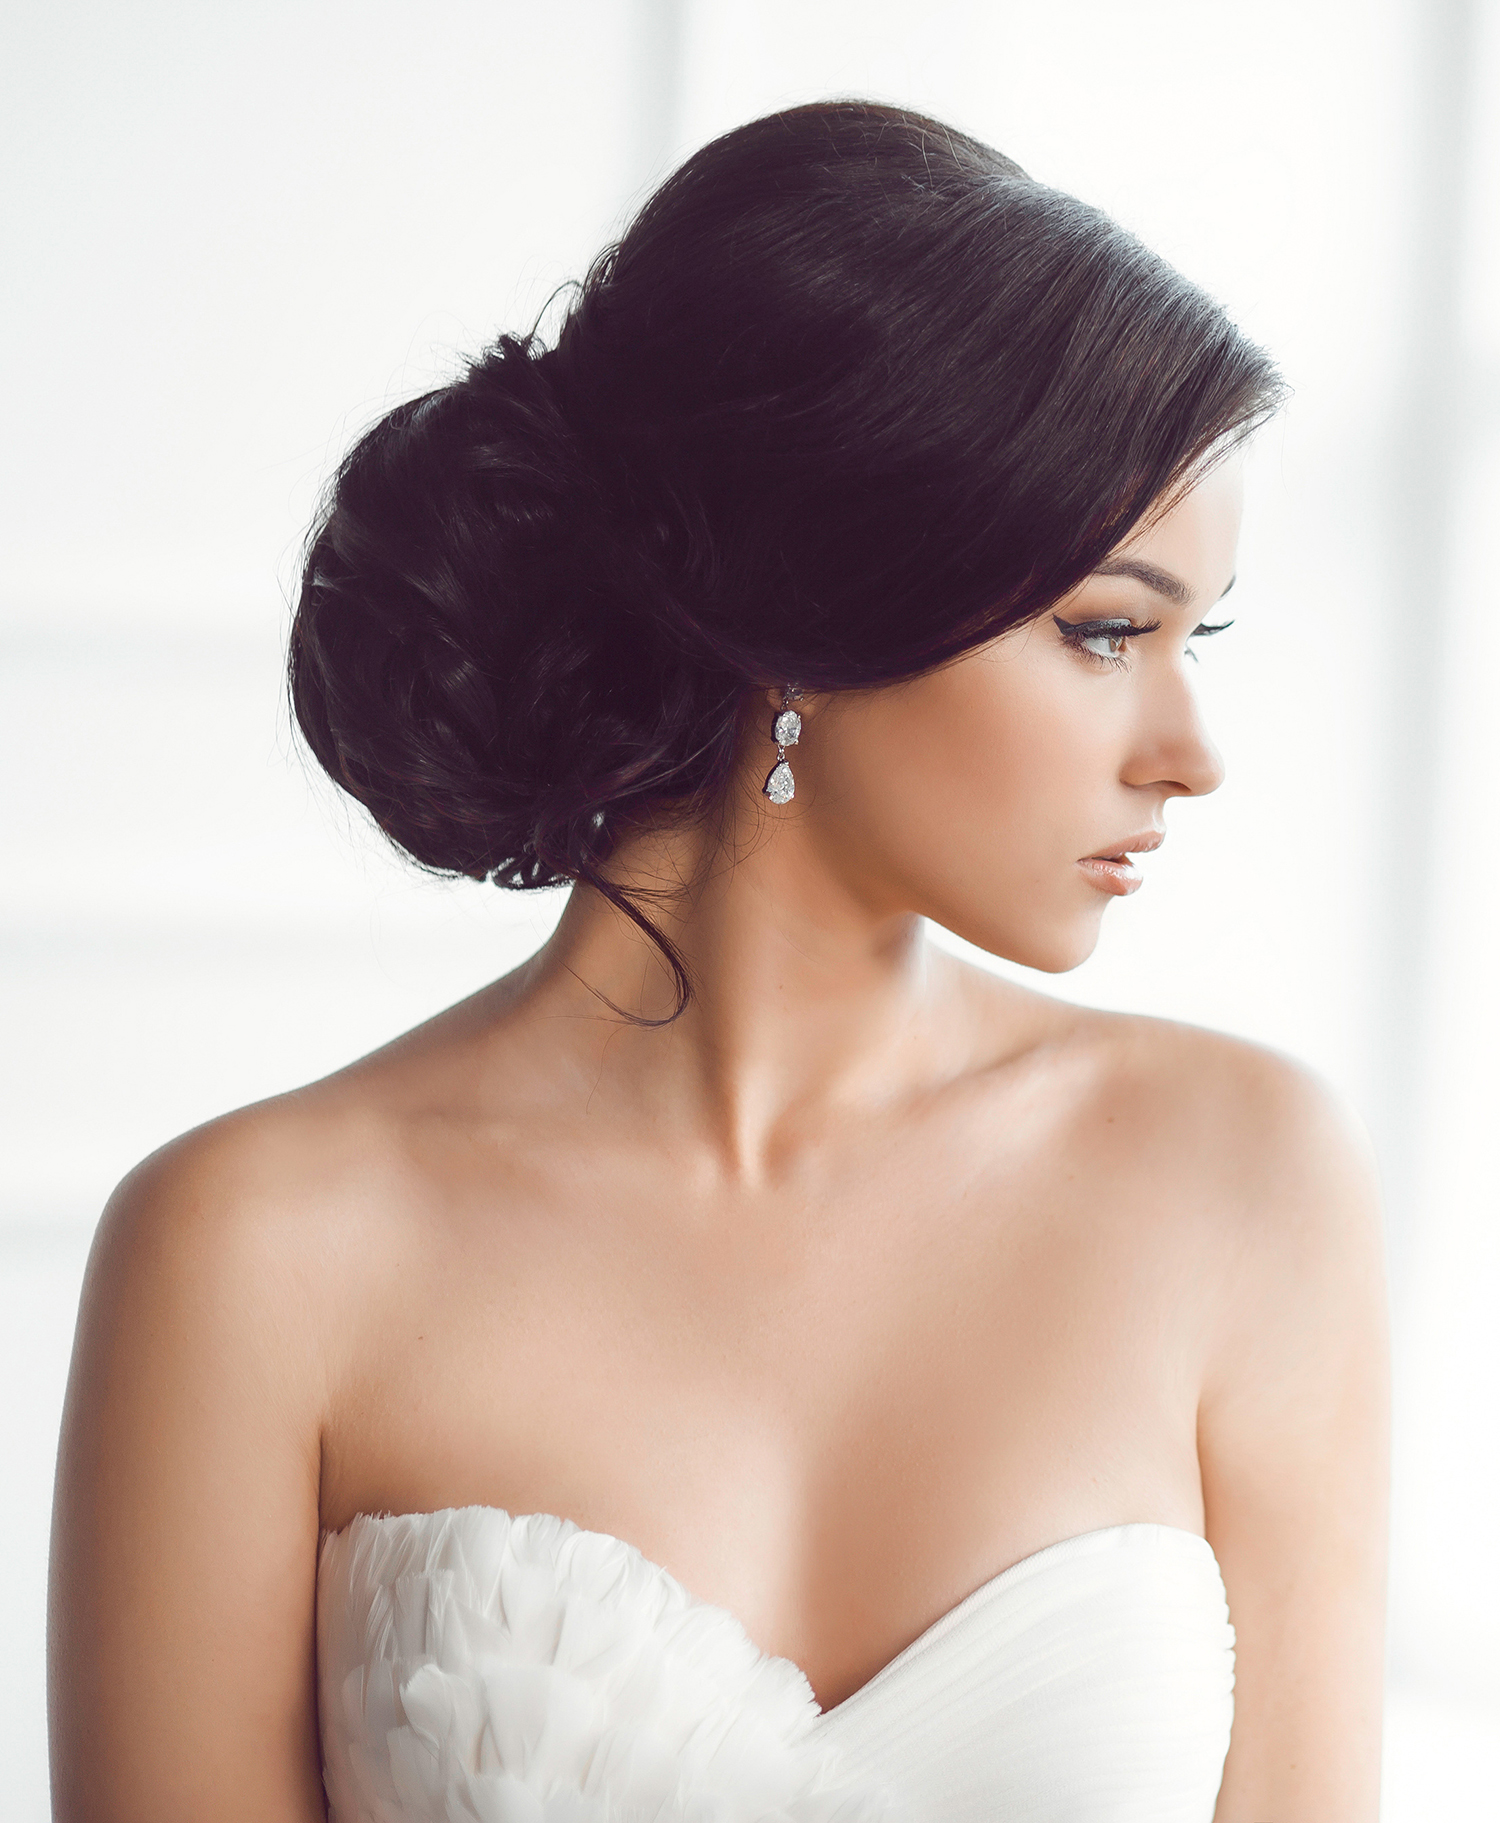 Another 15 Bridal Hairstyles & Wedding Updos